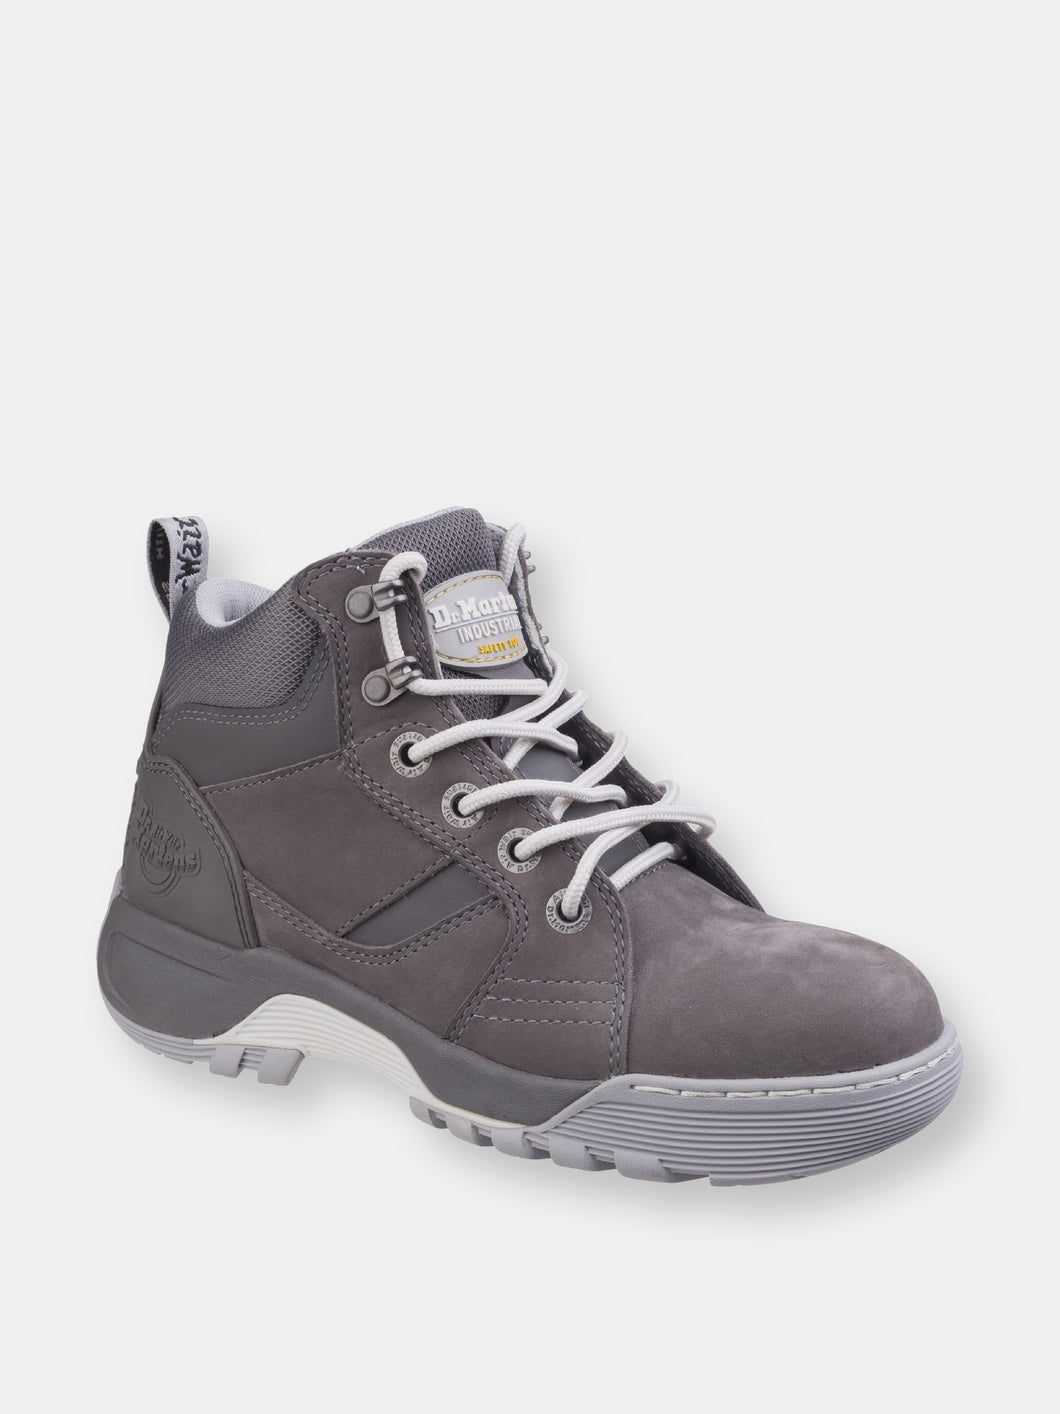 Womens/Ladies Opal ST Lightweight Leather Hiker Boot - Gray Wind River